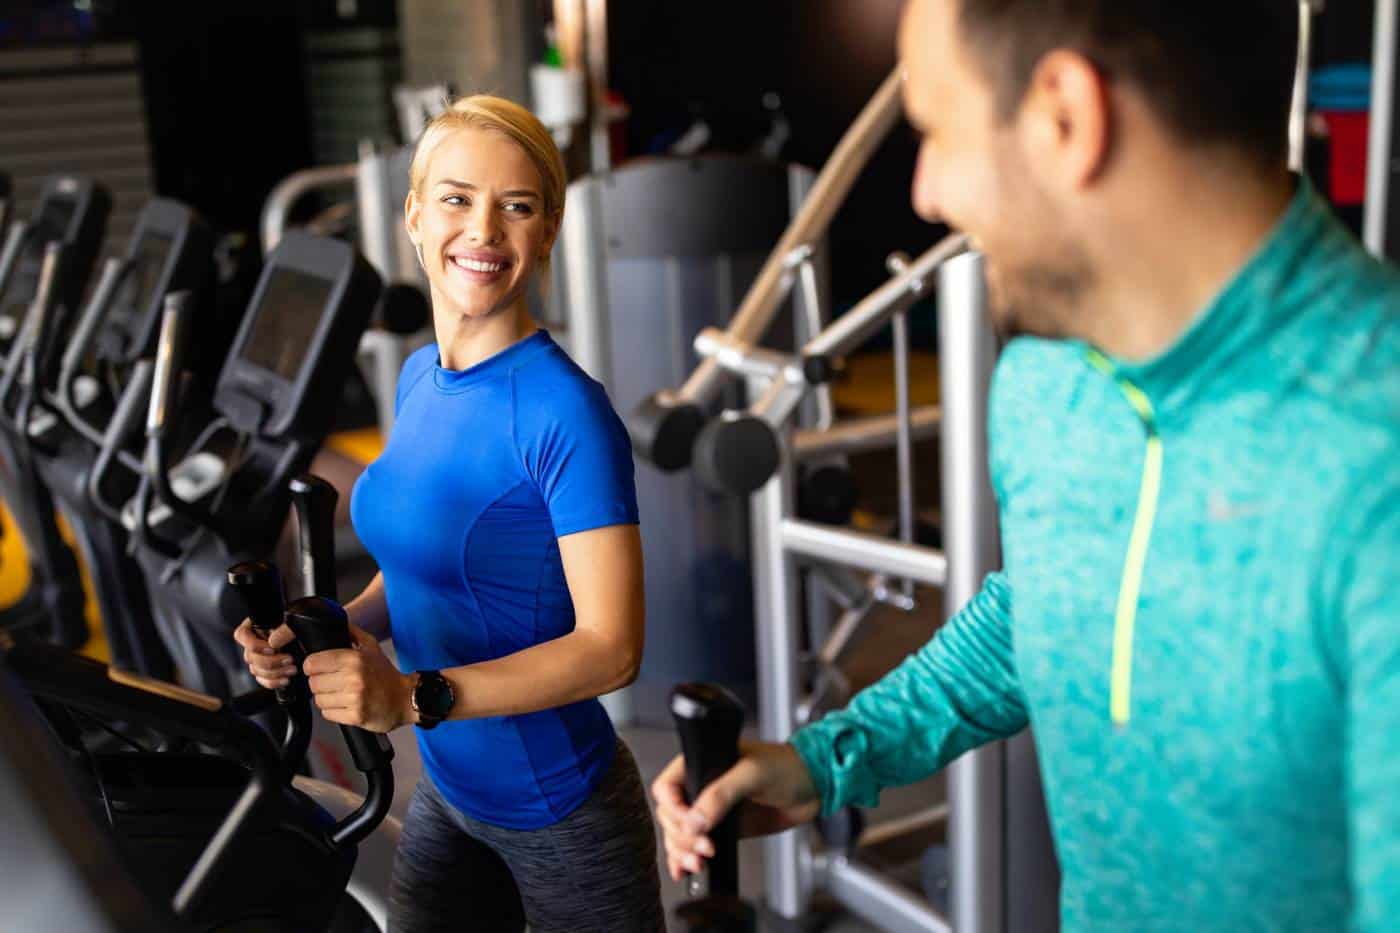 Happy people working out on treadmills in the gym